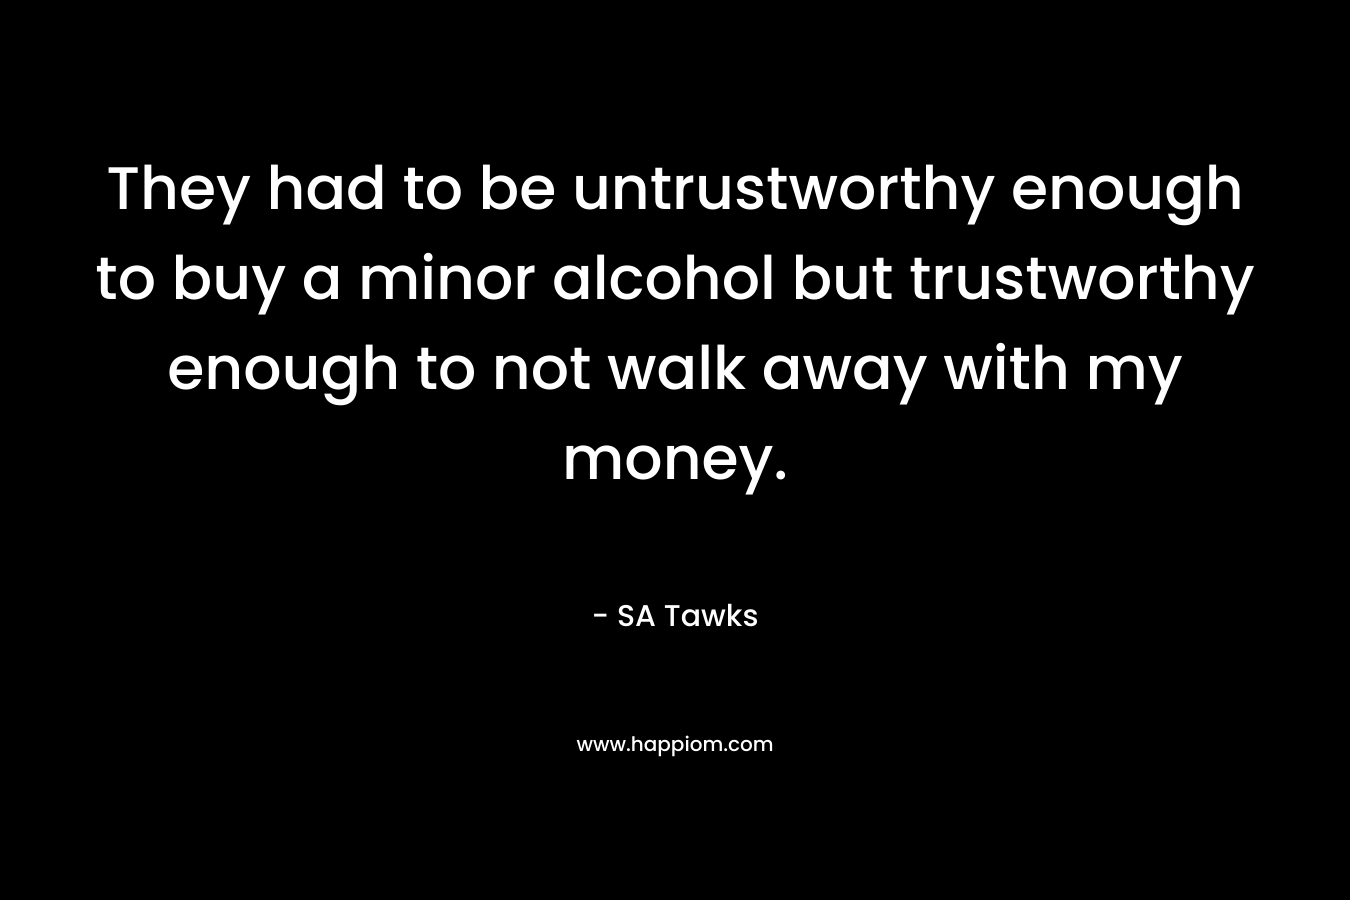 They had to be untrustworthy enough to buy a minor alcohol but trustworthy enough to not walk away with my money.